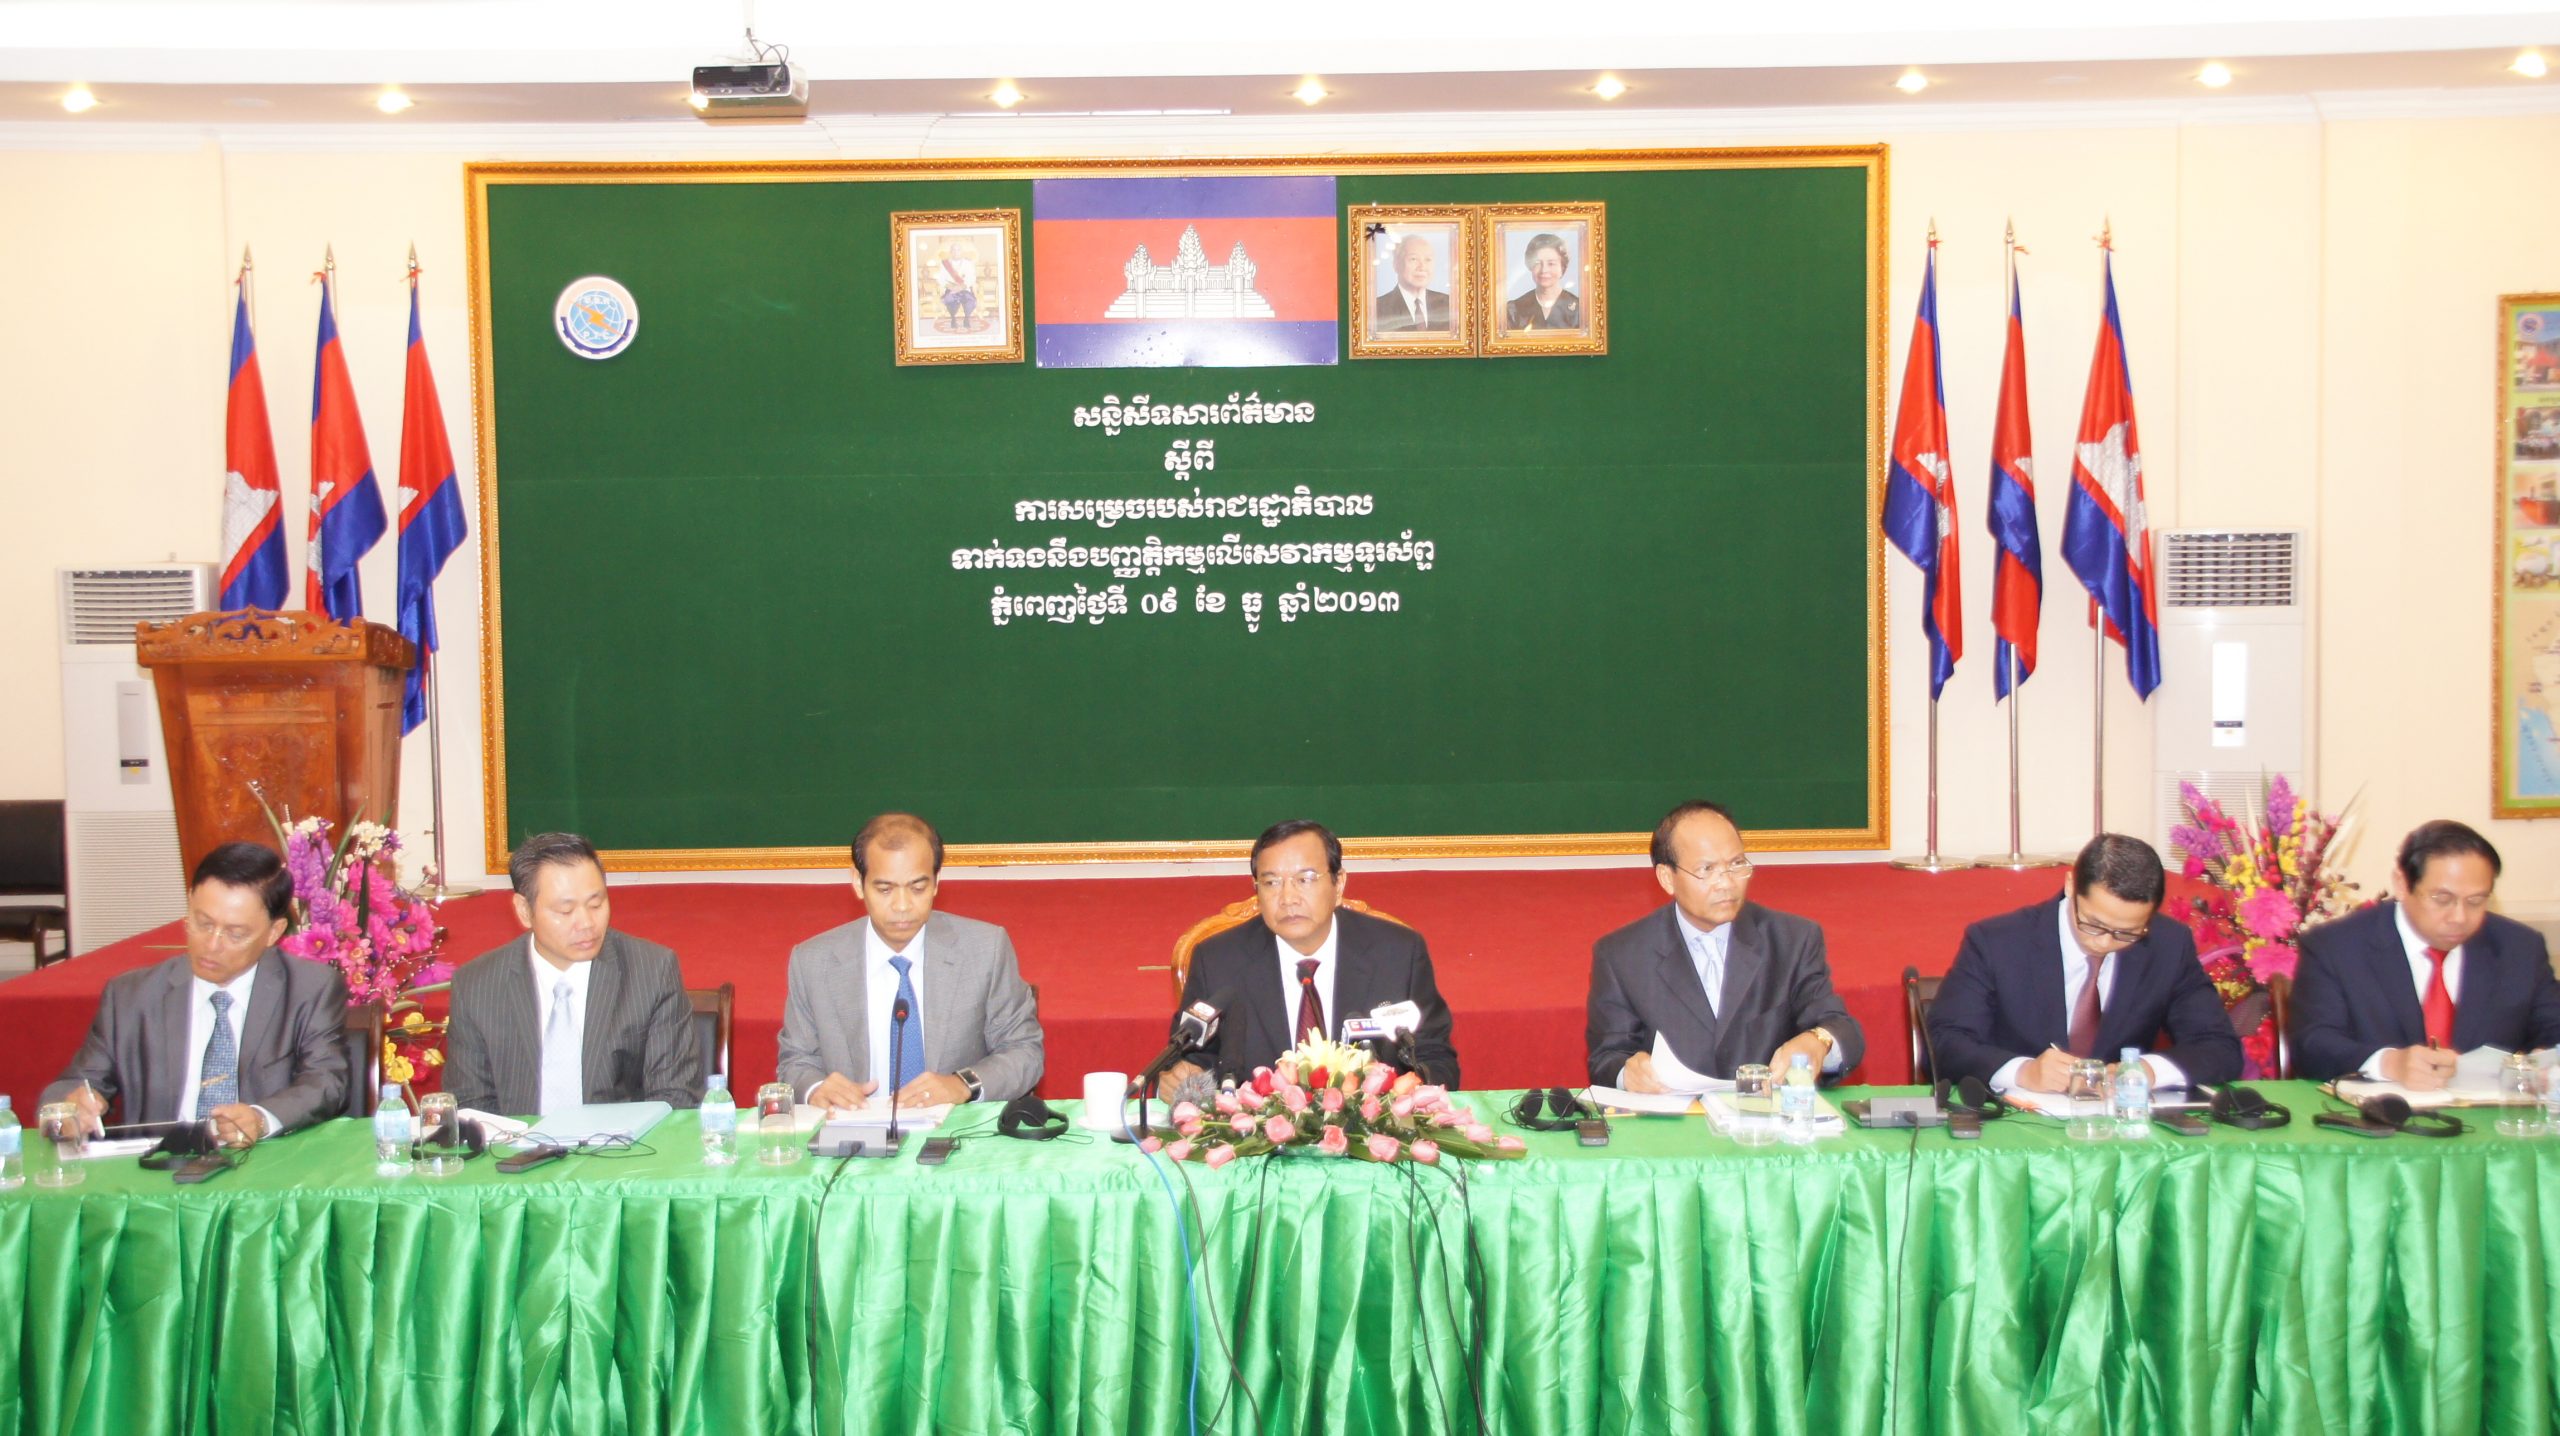 Conference on Decision of the Royal Government of Cambodia on Regulation of Telephone Services